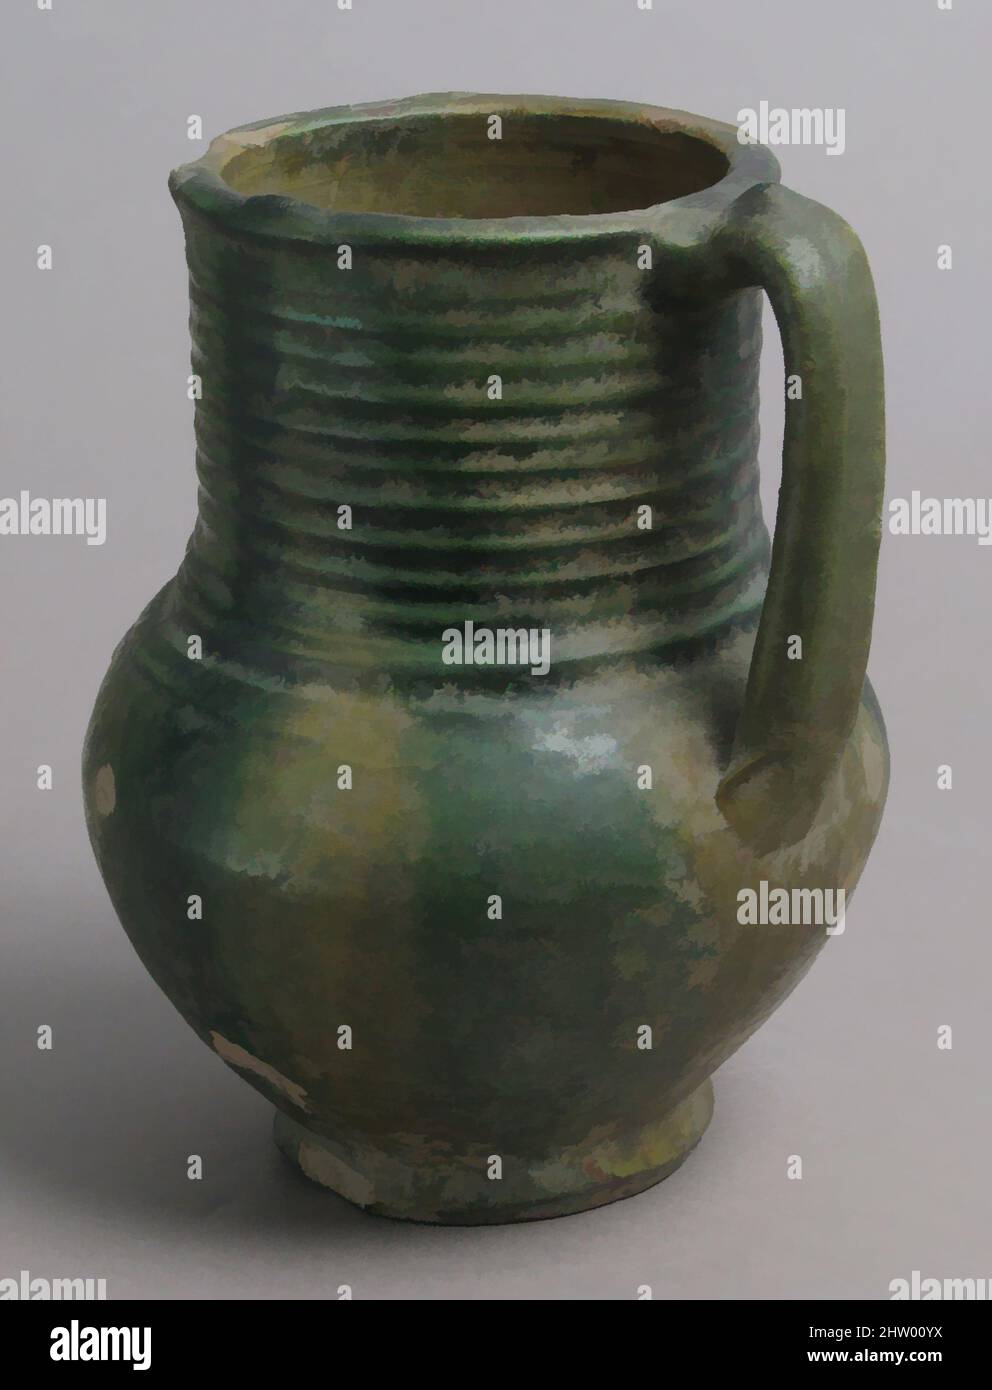 Art inspired by Jug, 13th–14th century, French, Earthenware, glaze, Overall: 6 11/16 x 4 15/16 x 5 3/8 in. (17 x 12.6 x 13.6 cm), Ceramics, Classic works modernized by Artotop with a splash of modernity. Shapes, color and value, eye-catching visual impact on art. Emotions through freedom of artworks in a contemporary way. A timeless message pursuing a wildly creative new direction. Artists turning to the digital medium and creating the Artotop NFT Stock Photo